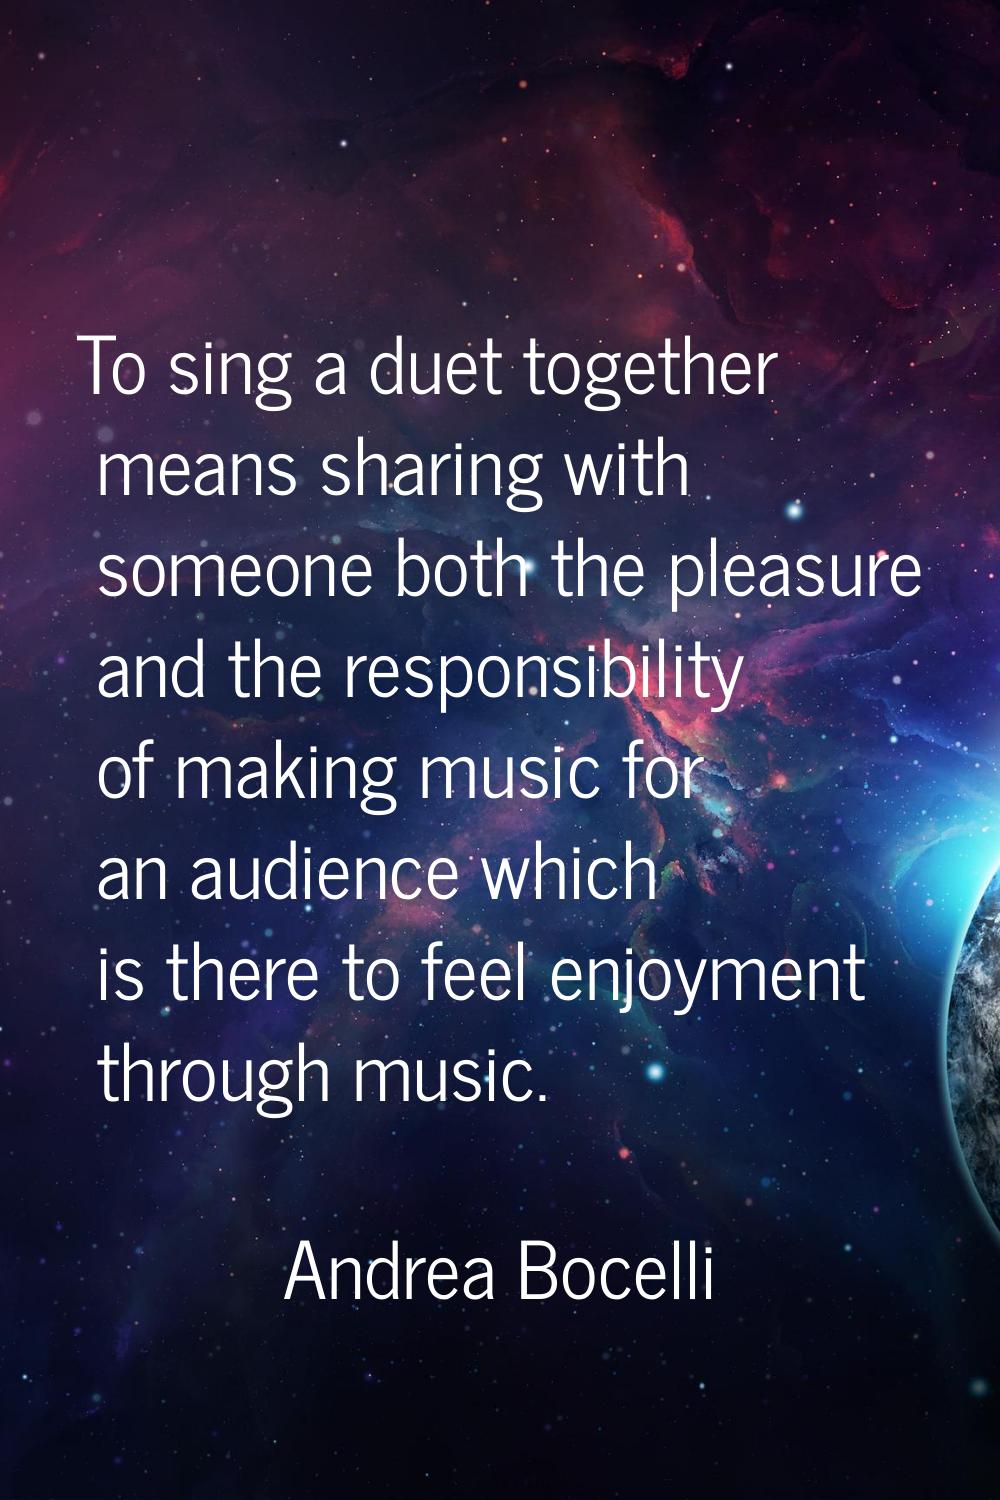 To sing a duet together means sharing with someone both the pleasure and the responsibility of maki